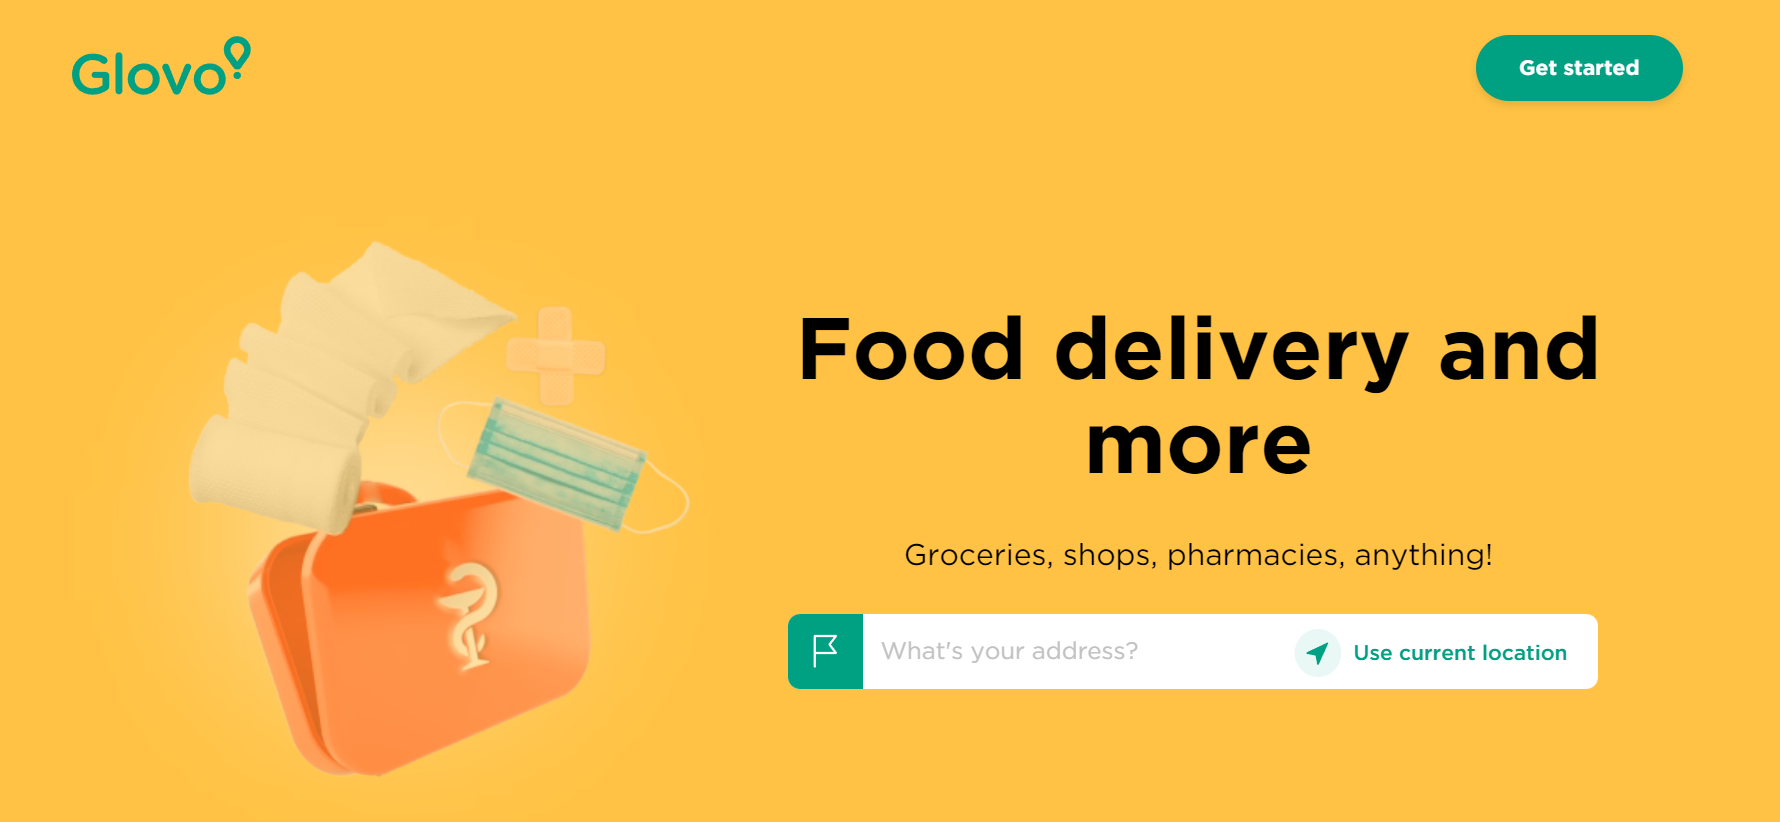 Glovo is one of the most popular native applications